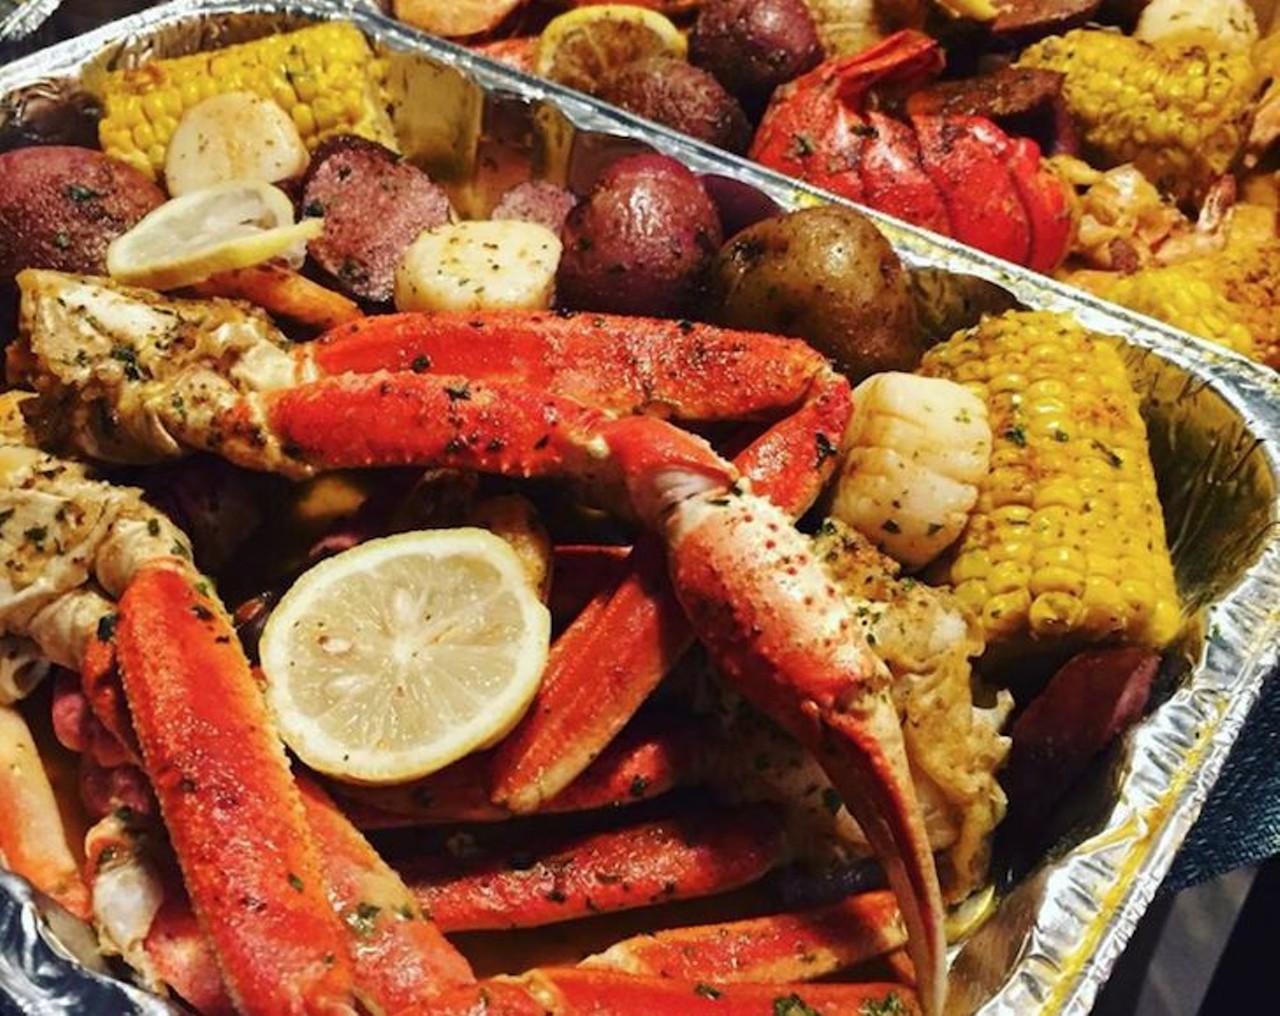 Nati's Southern Seafood Boil  
231 Broadway Ave., Kissimmee, 407-201-3387
Calling all lobster and crawfish lovers, we have a place for you. Nati&#146;s offers two pound baskets of lobster, crab and there&#146;s plenty of shellfish to go around, too. If you&#146;re bringing the family why not try the crab and shrimp family feast? It comes with five pounds of crab, one pound of shrimp, corn, sausage, garlic toast and potatoes. Bring a huge appetite. 
Photo via Facebook/Nati's Southern Seafood Boil